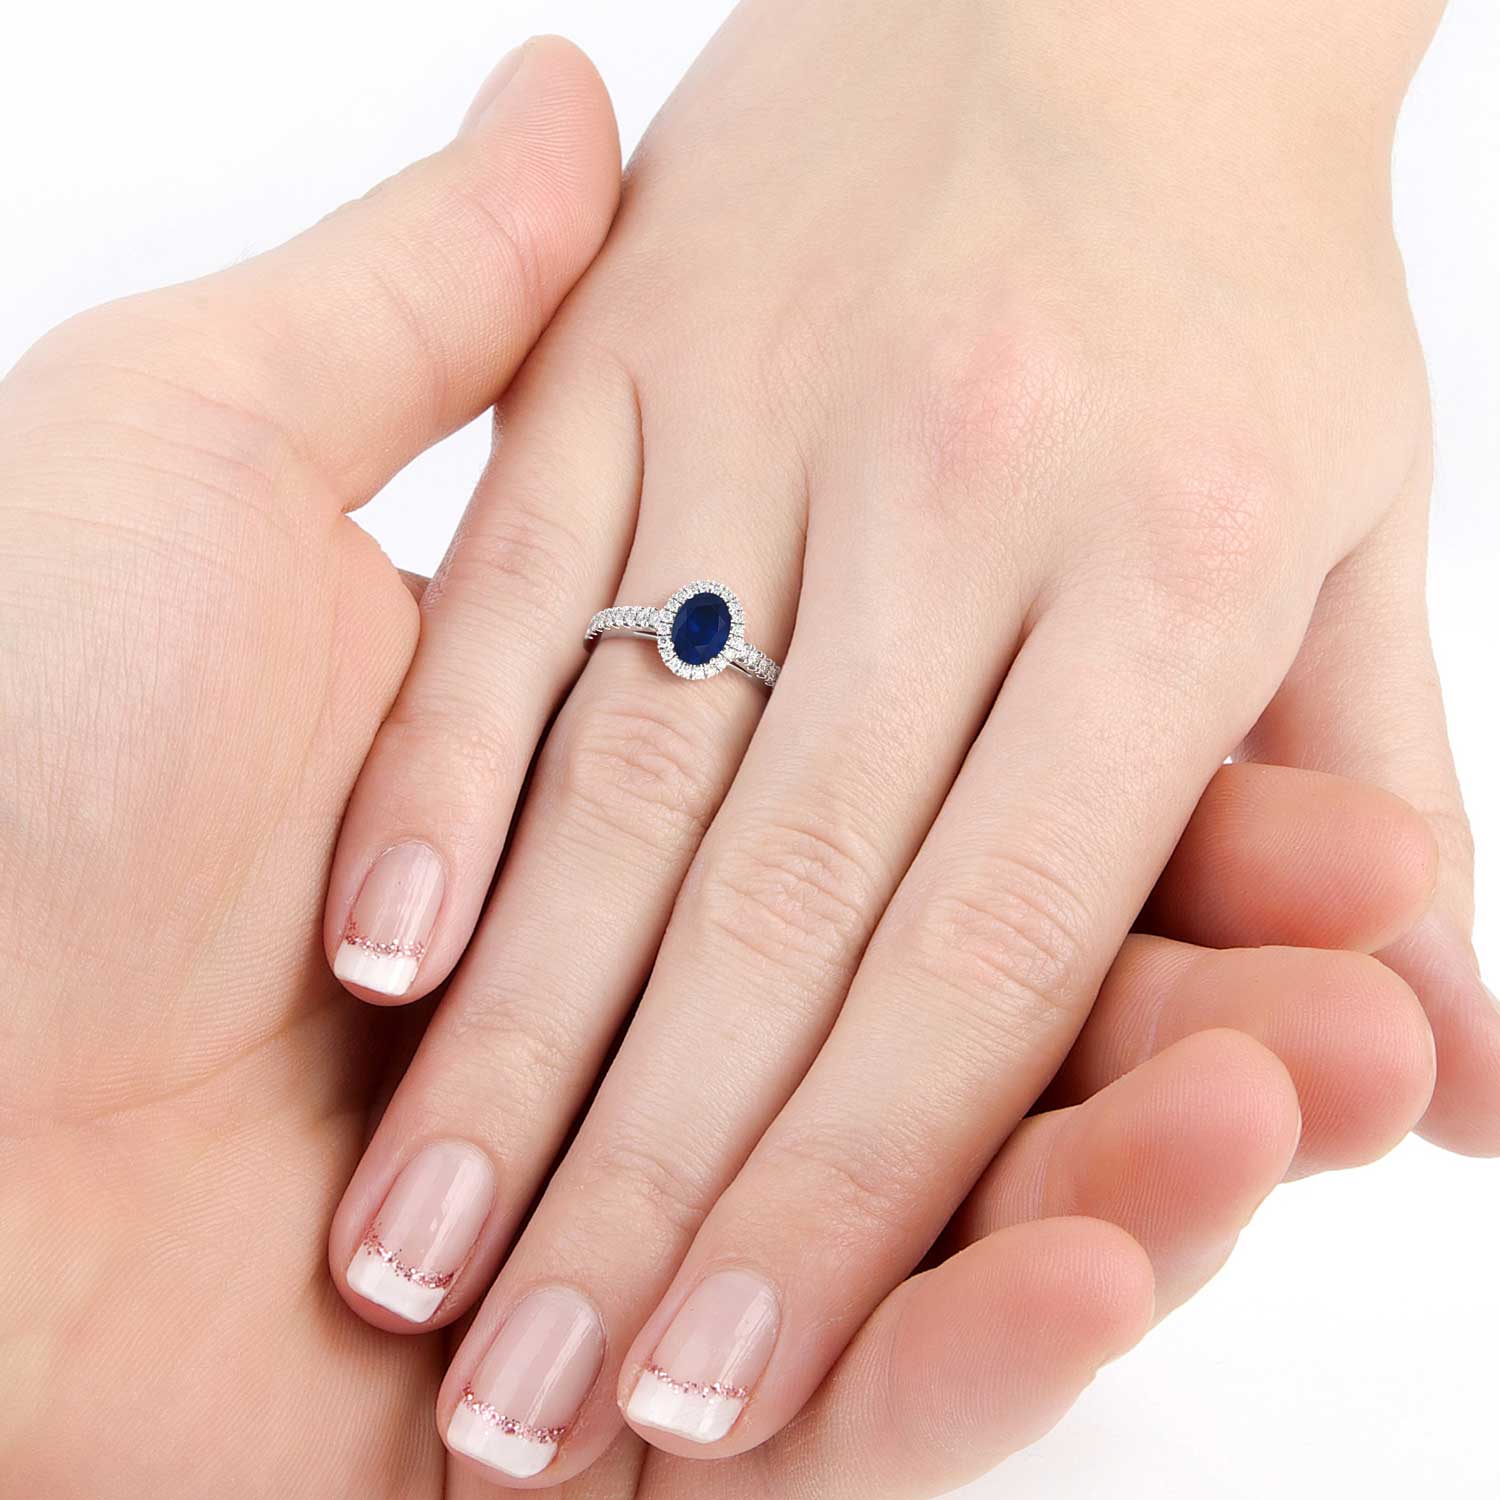 A stunning sapphire gemstone ring, featuring its deep blue color and exquisite brilliance, gracefully adorning a finger.